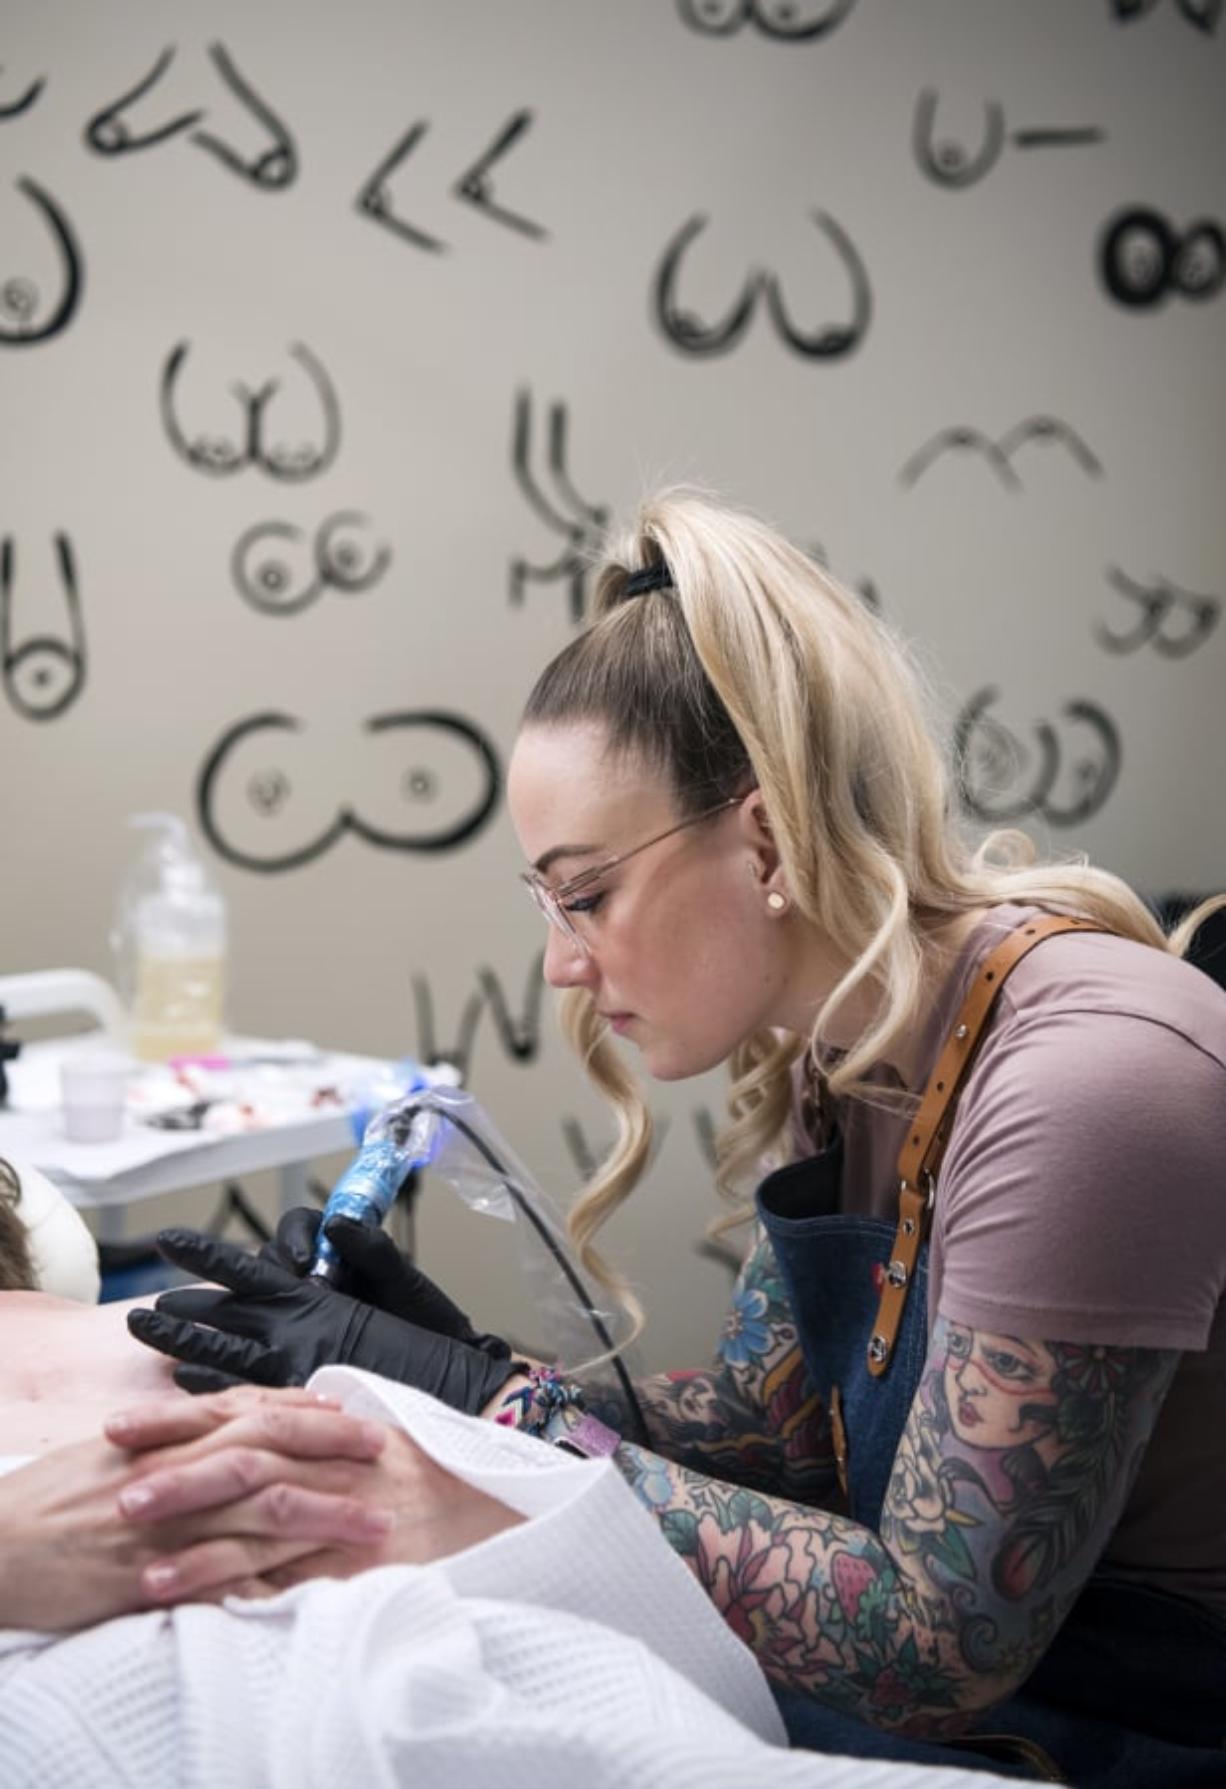 Vancouver resident Lina Anderson performs an areola restoration procedure with her client Mary, of Vancouver, at Studio Meraki in Portland. In the background, Anderson has a wall of breasts that she painted.